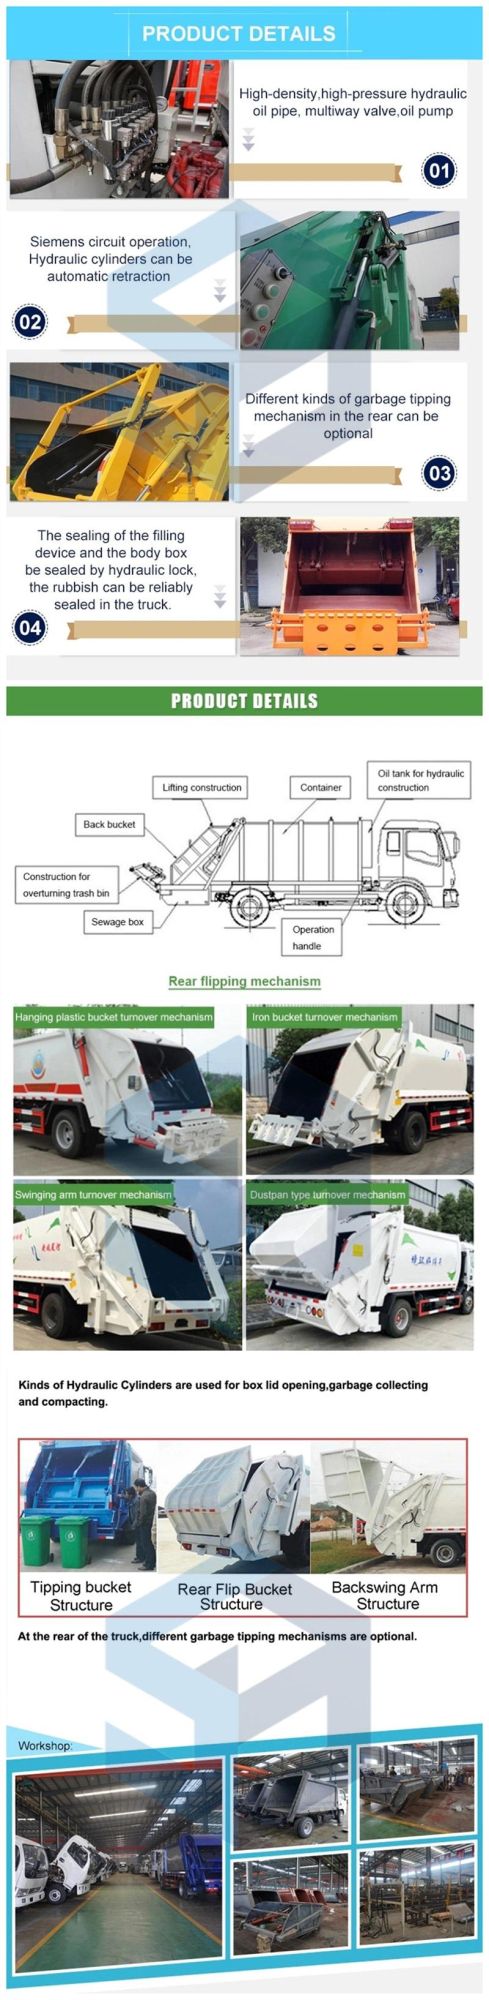 Foton 14-16cbm Waste Collection Vehicle Heavy Duty Refuse Truck Compactor Garbage Truck